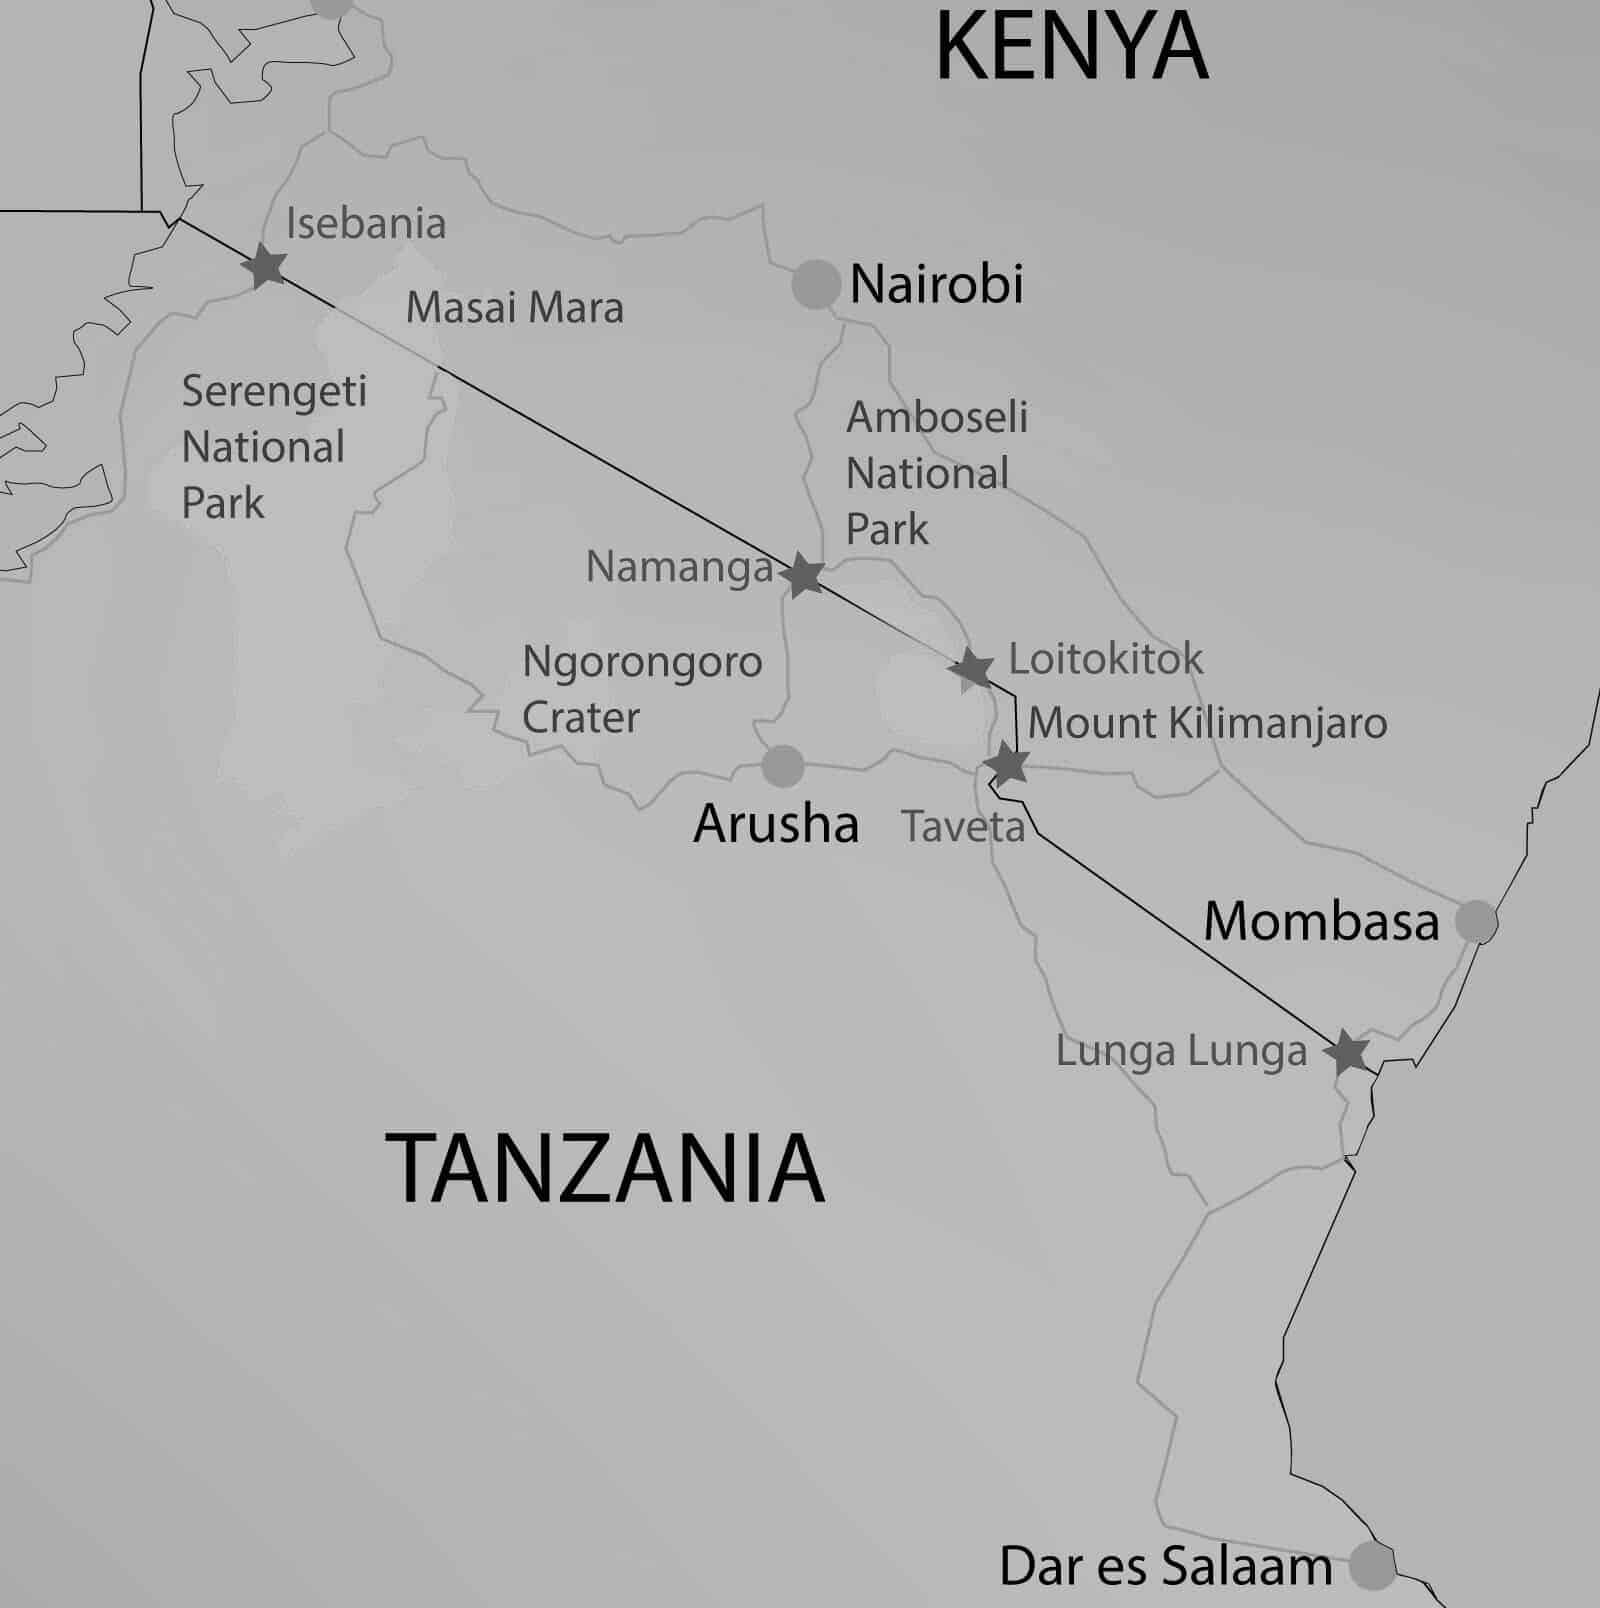 Kenya to Tanzia route on map